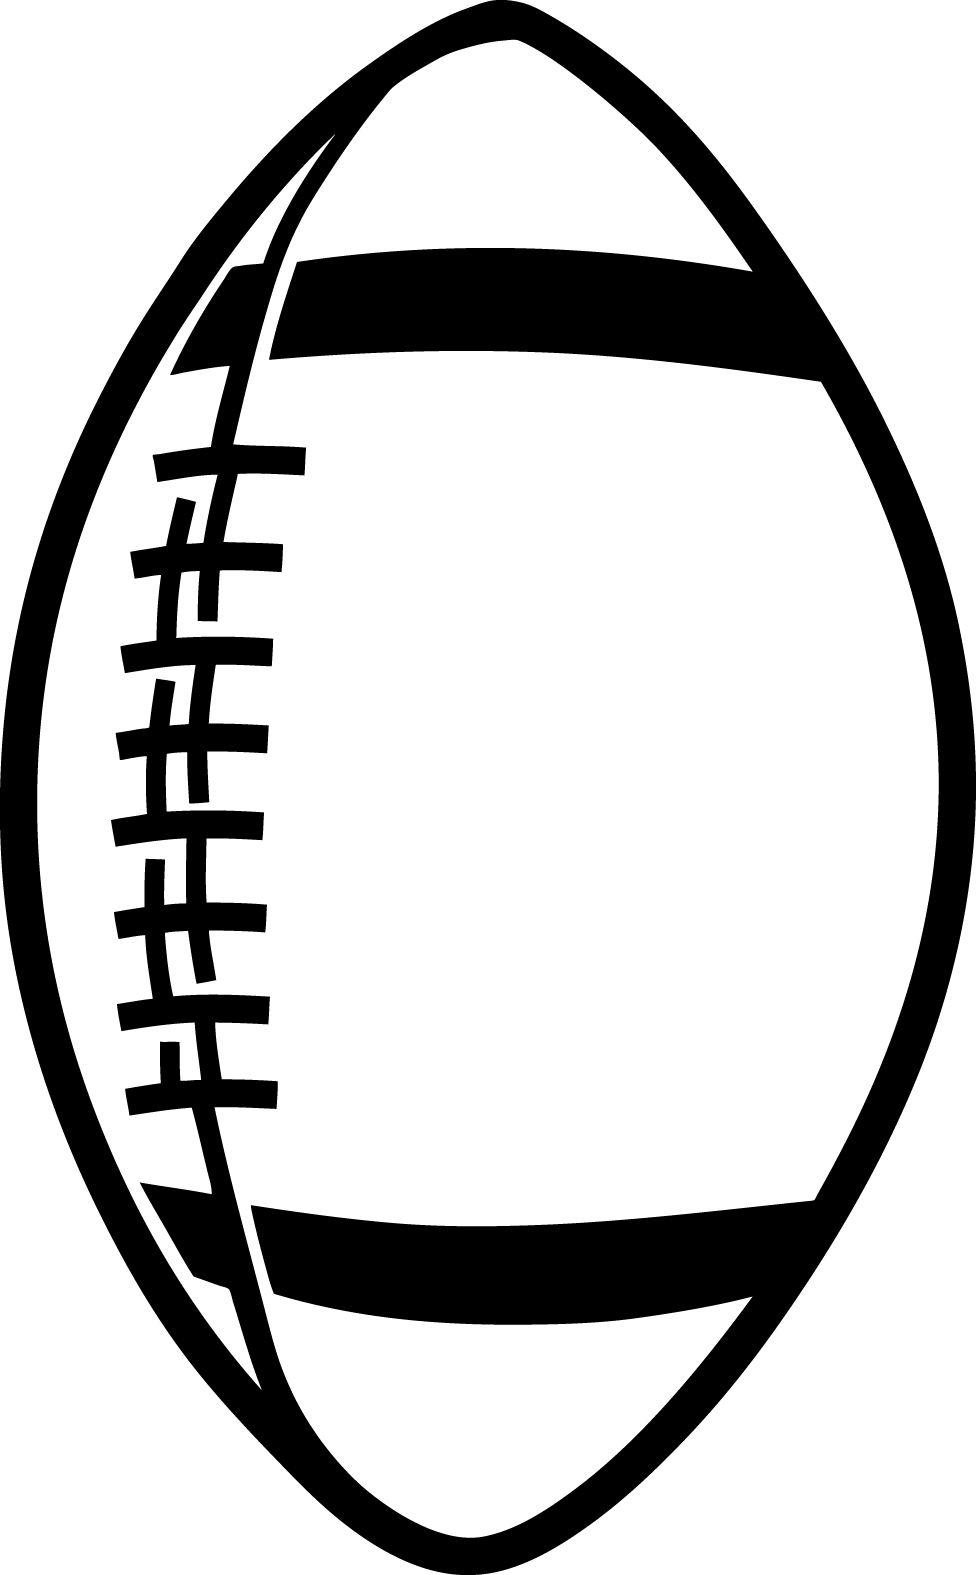 Football Laces Outline | Clipart Panda - Free Clipart Images